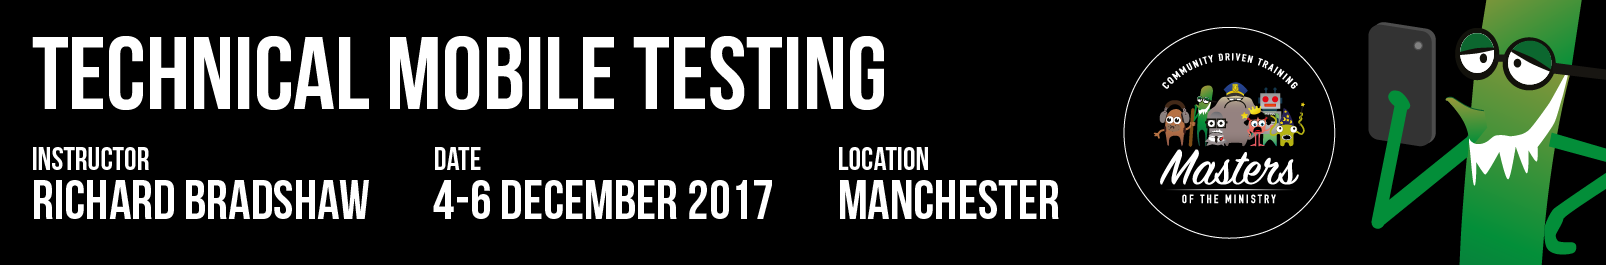 Technical Mobile Testing - 3 Day Class - Manchester - Richard Bradshaw banner image